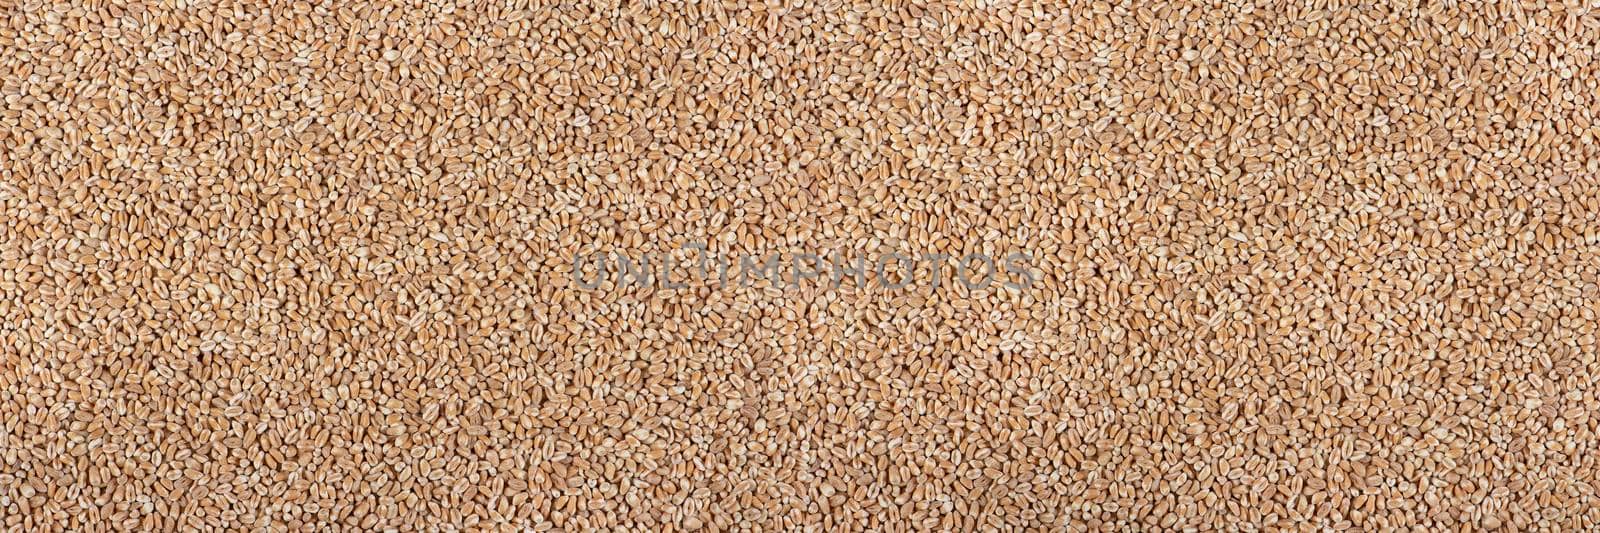 Texture of wheat, grains. Background for dry wheat design. Large size for banner printing or packaging. Top view of an evenly scattered grain of wheat. by SERSOL